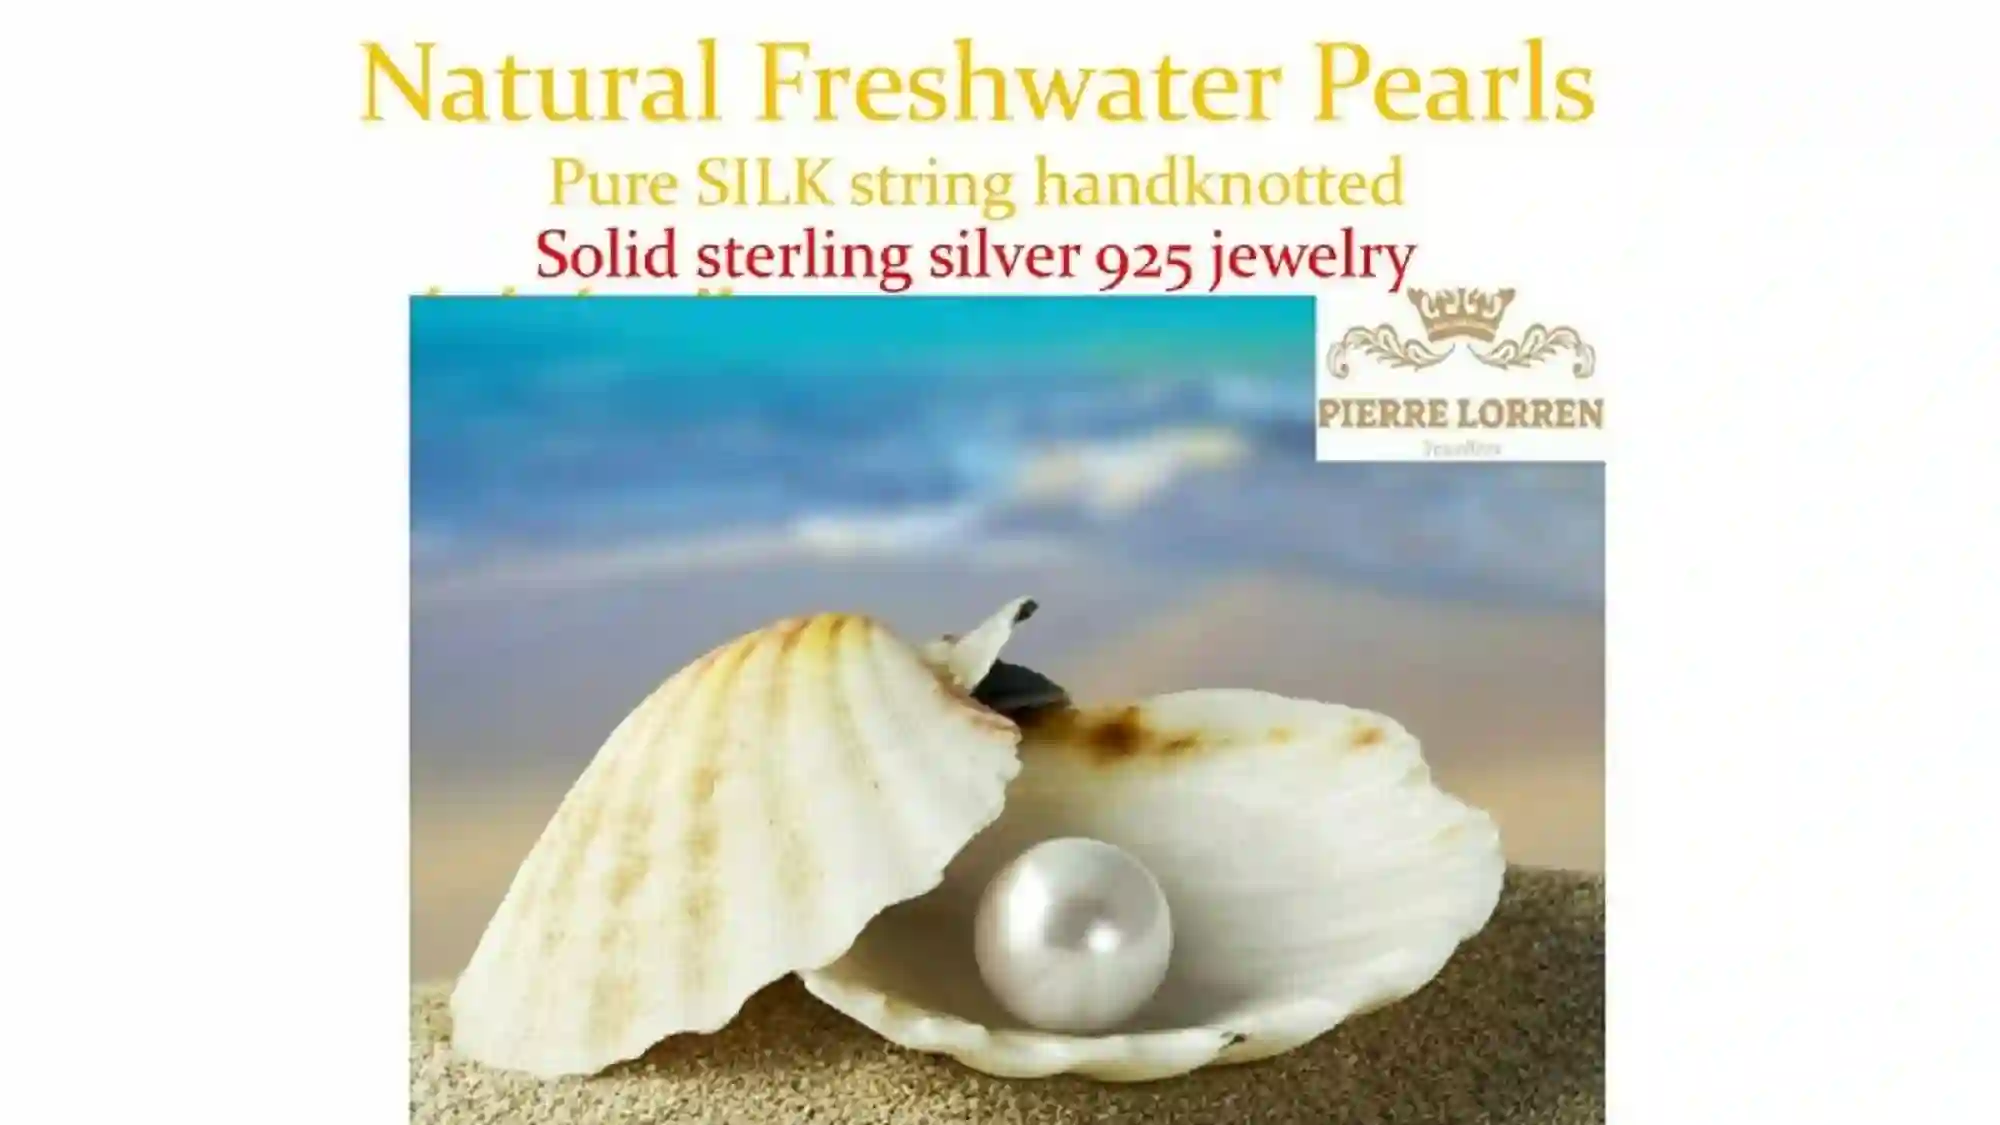 Yoshiko Japanese Freshwater Pearl Jewelry -Sterling Silver Natural Pearl Necklace -Baroque Pearl Jewelry gift-AAA quality High Luster pearls 